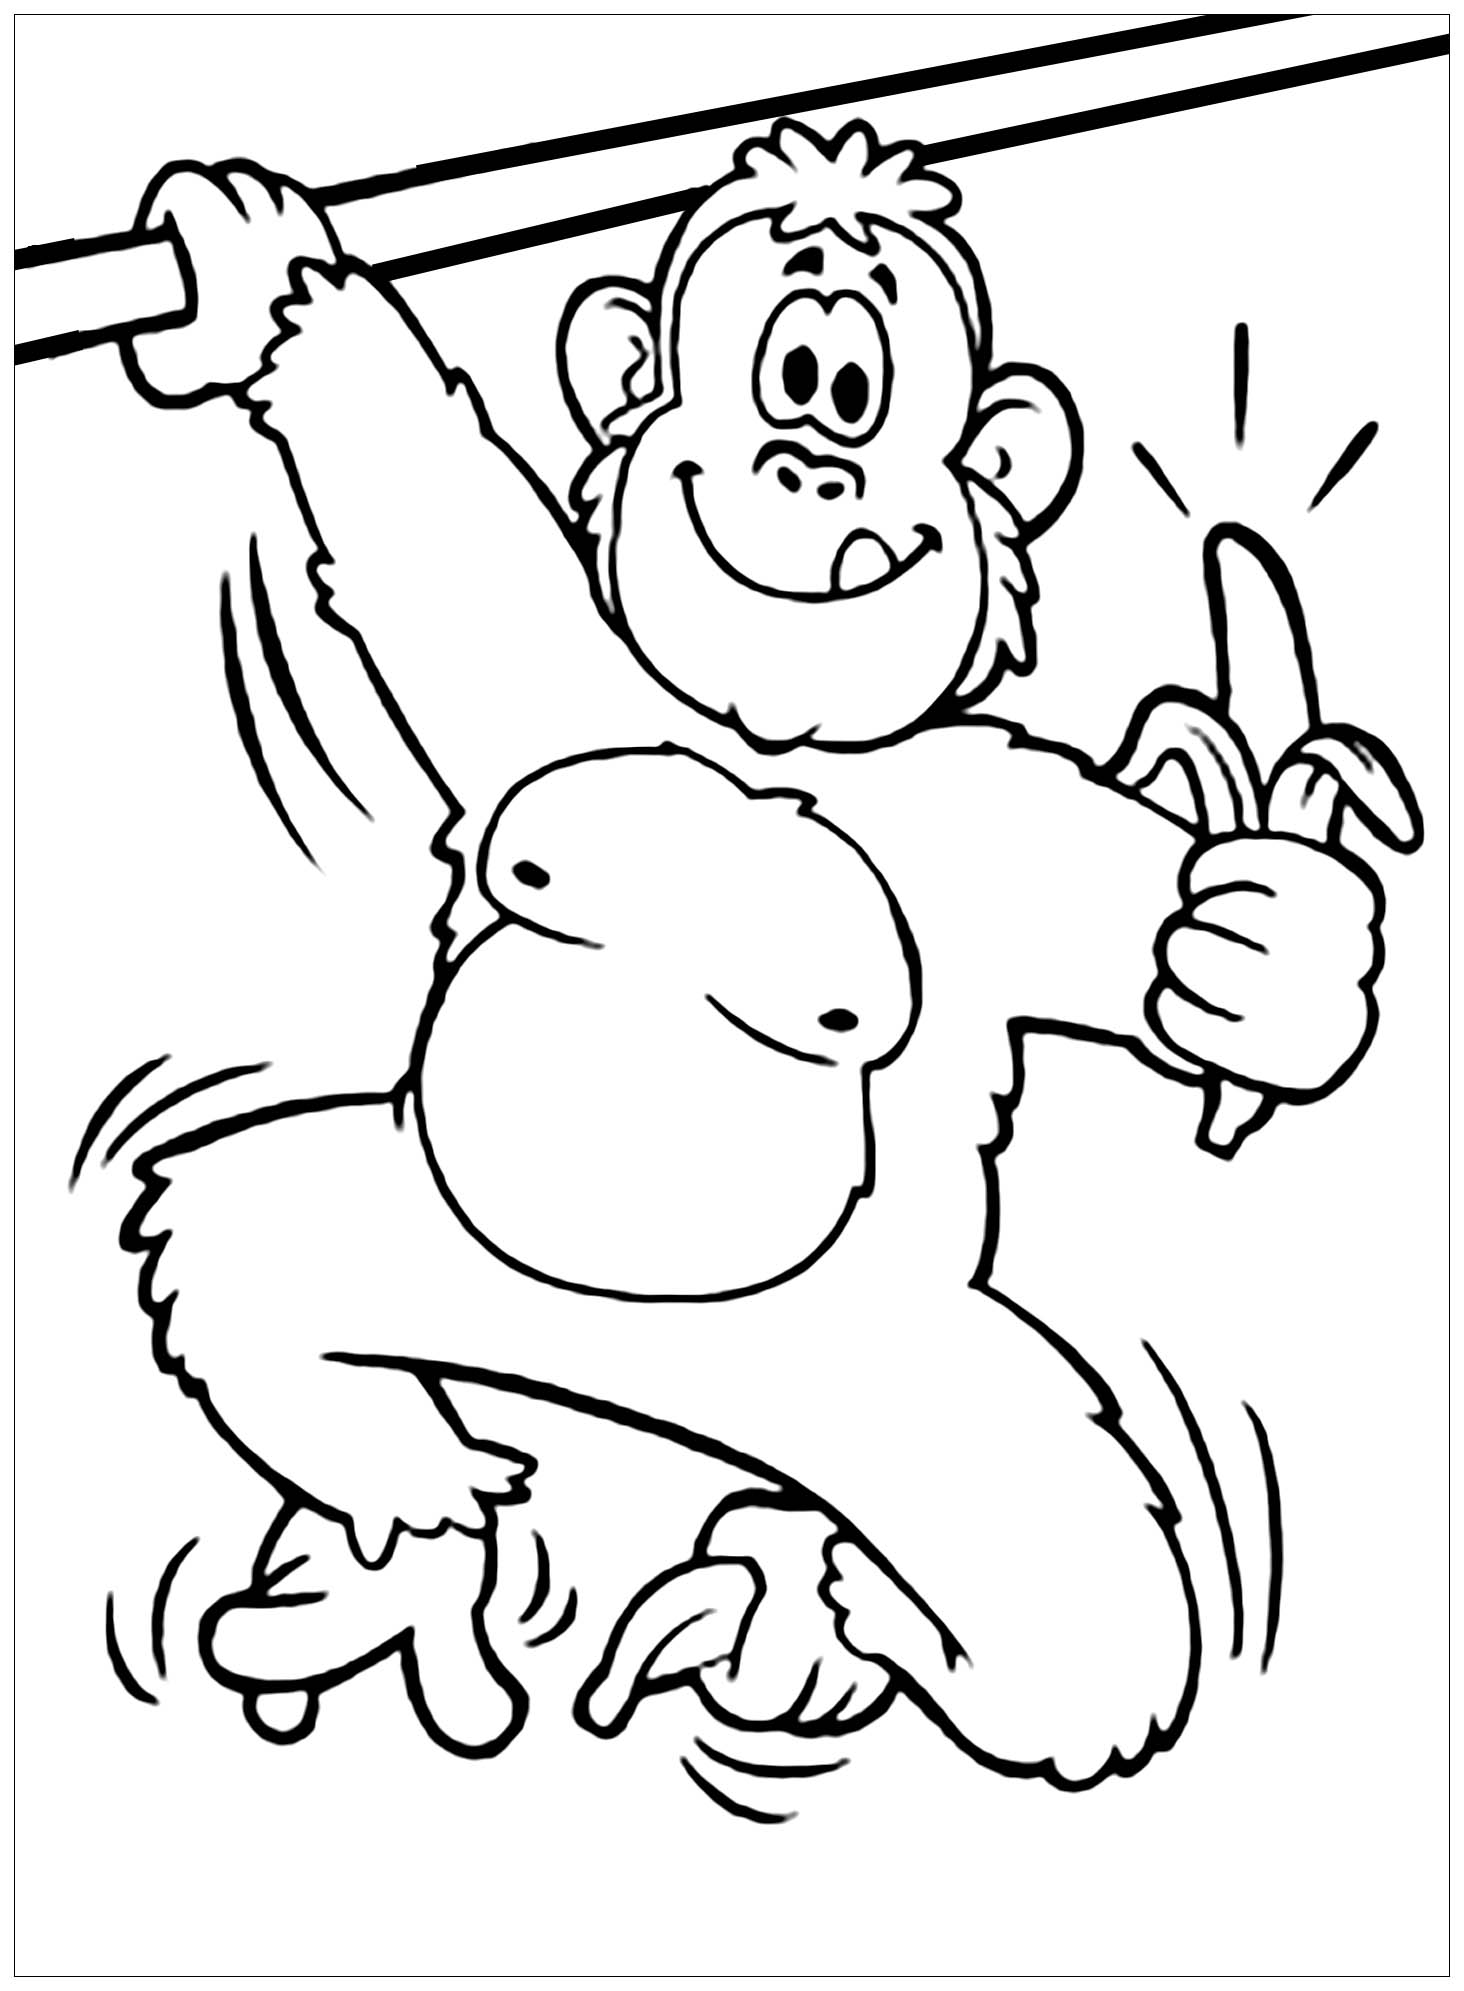 Easy monkey coloring for kids